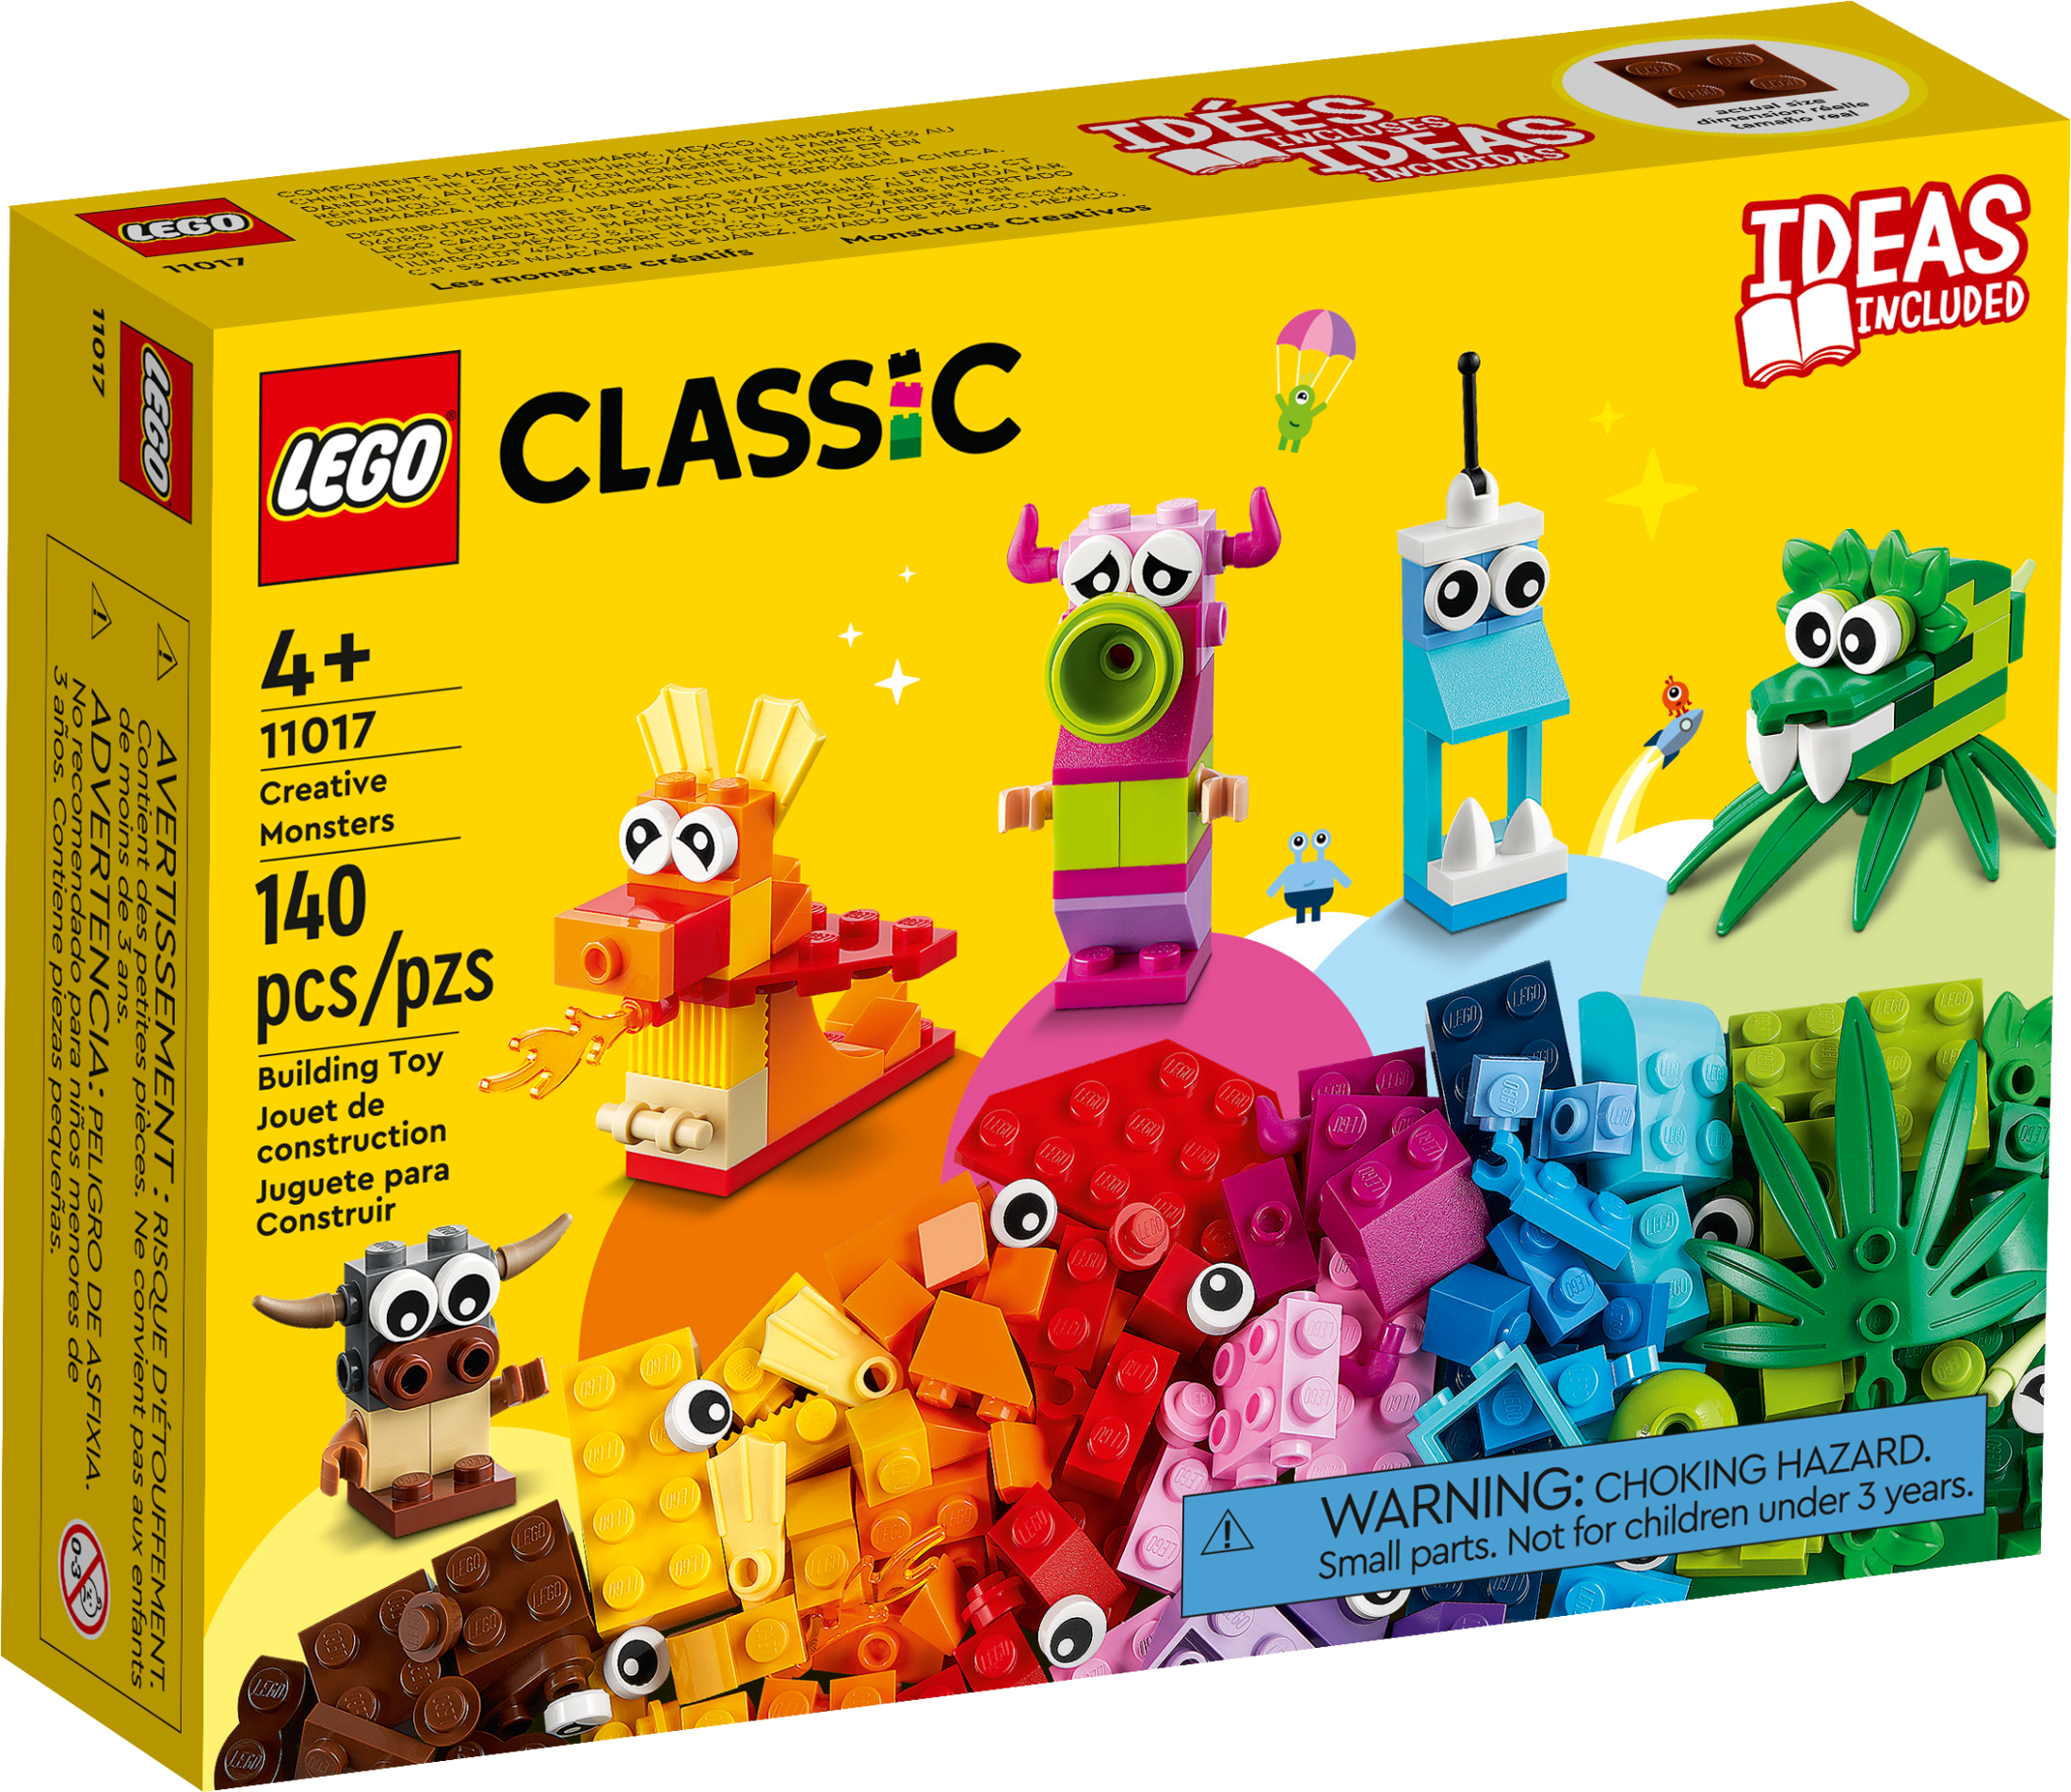 LEGO Classic Creative Monsters 11017 Building Kit, Includes 5 Monster Toy Mini Build Ideas to Inspire Creative Play for Kids Ages 4 and Up, Children can Build and Be Inspired by LEGO Masters - image 3 of 8